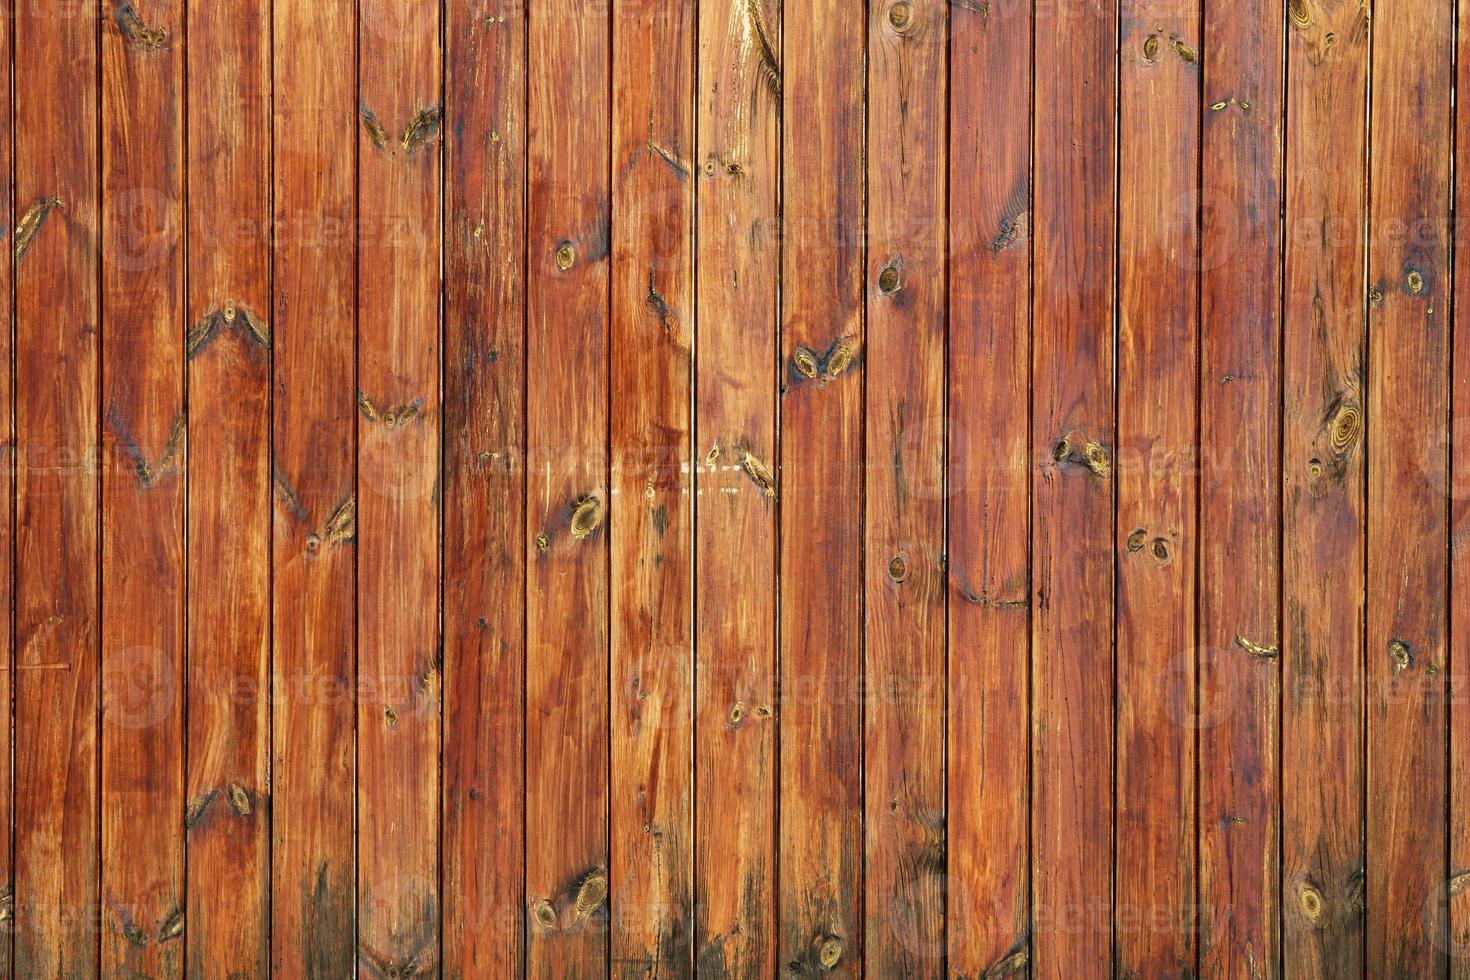 Wood abstract texture. Surface grunge backdrop. Dirty wooden effect pattern. Material background. photo